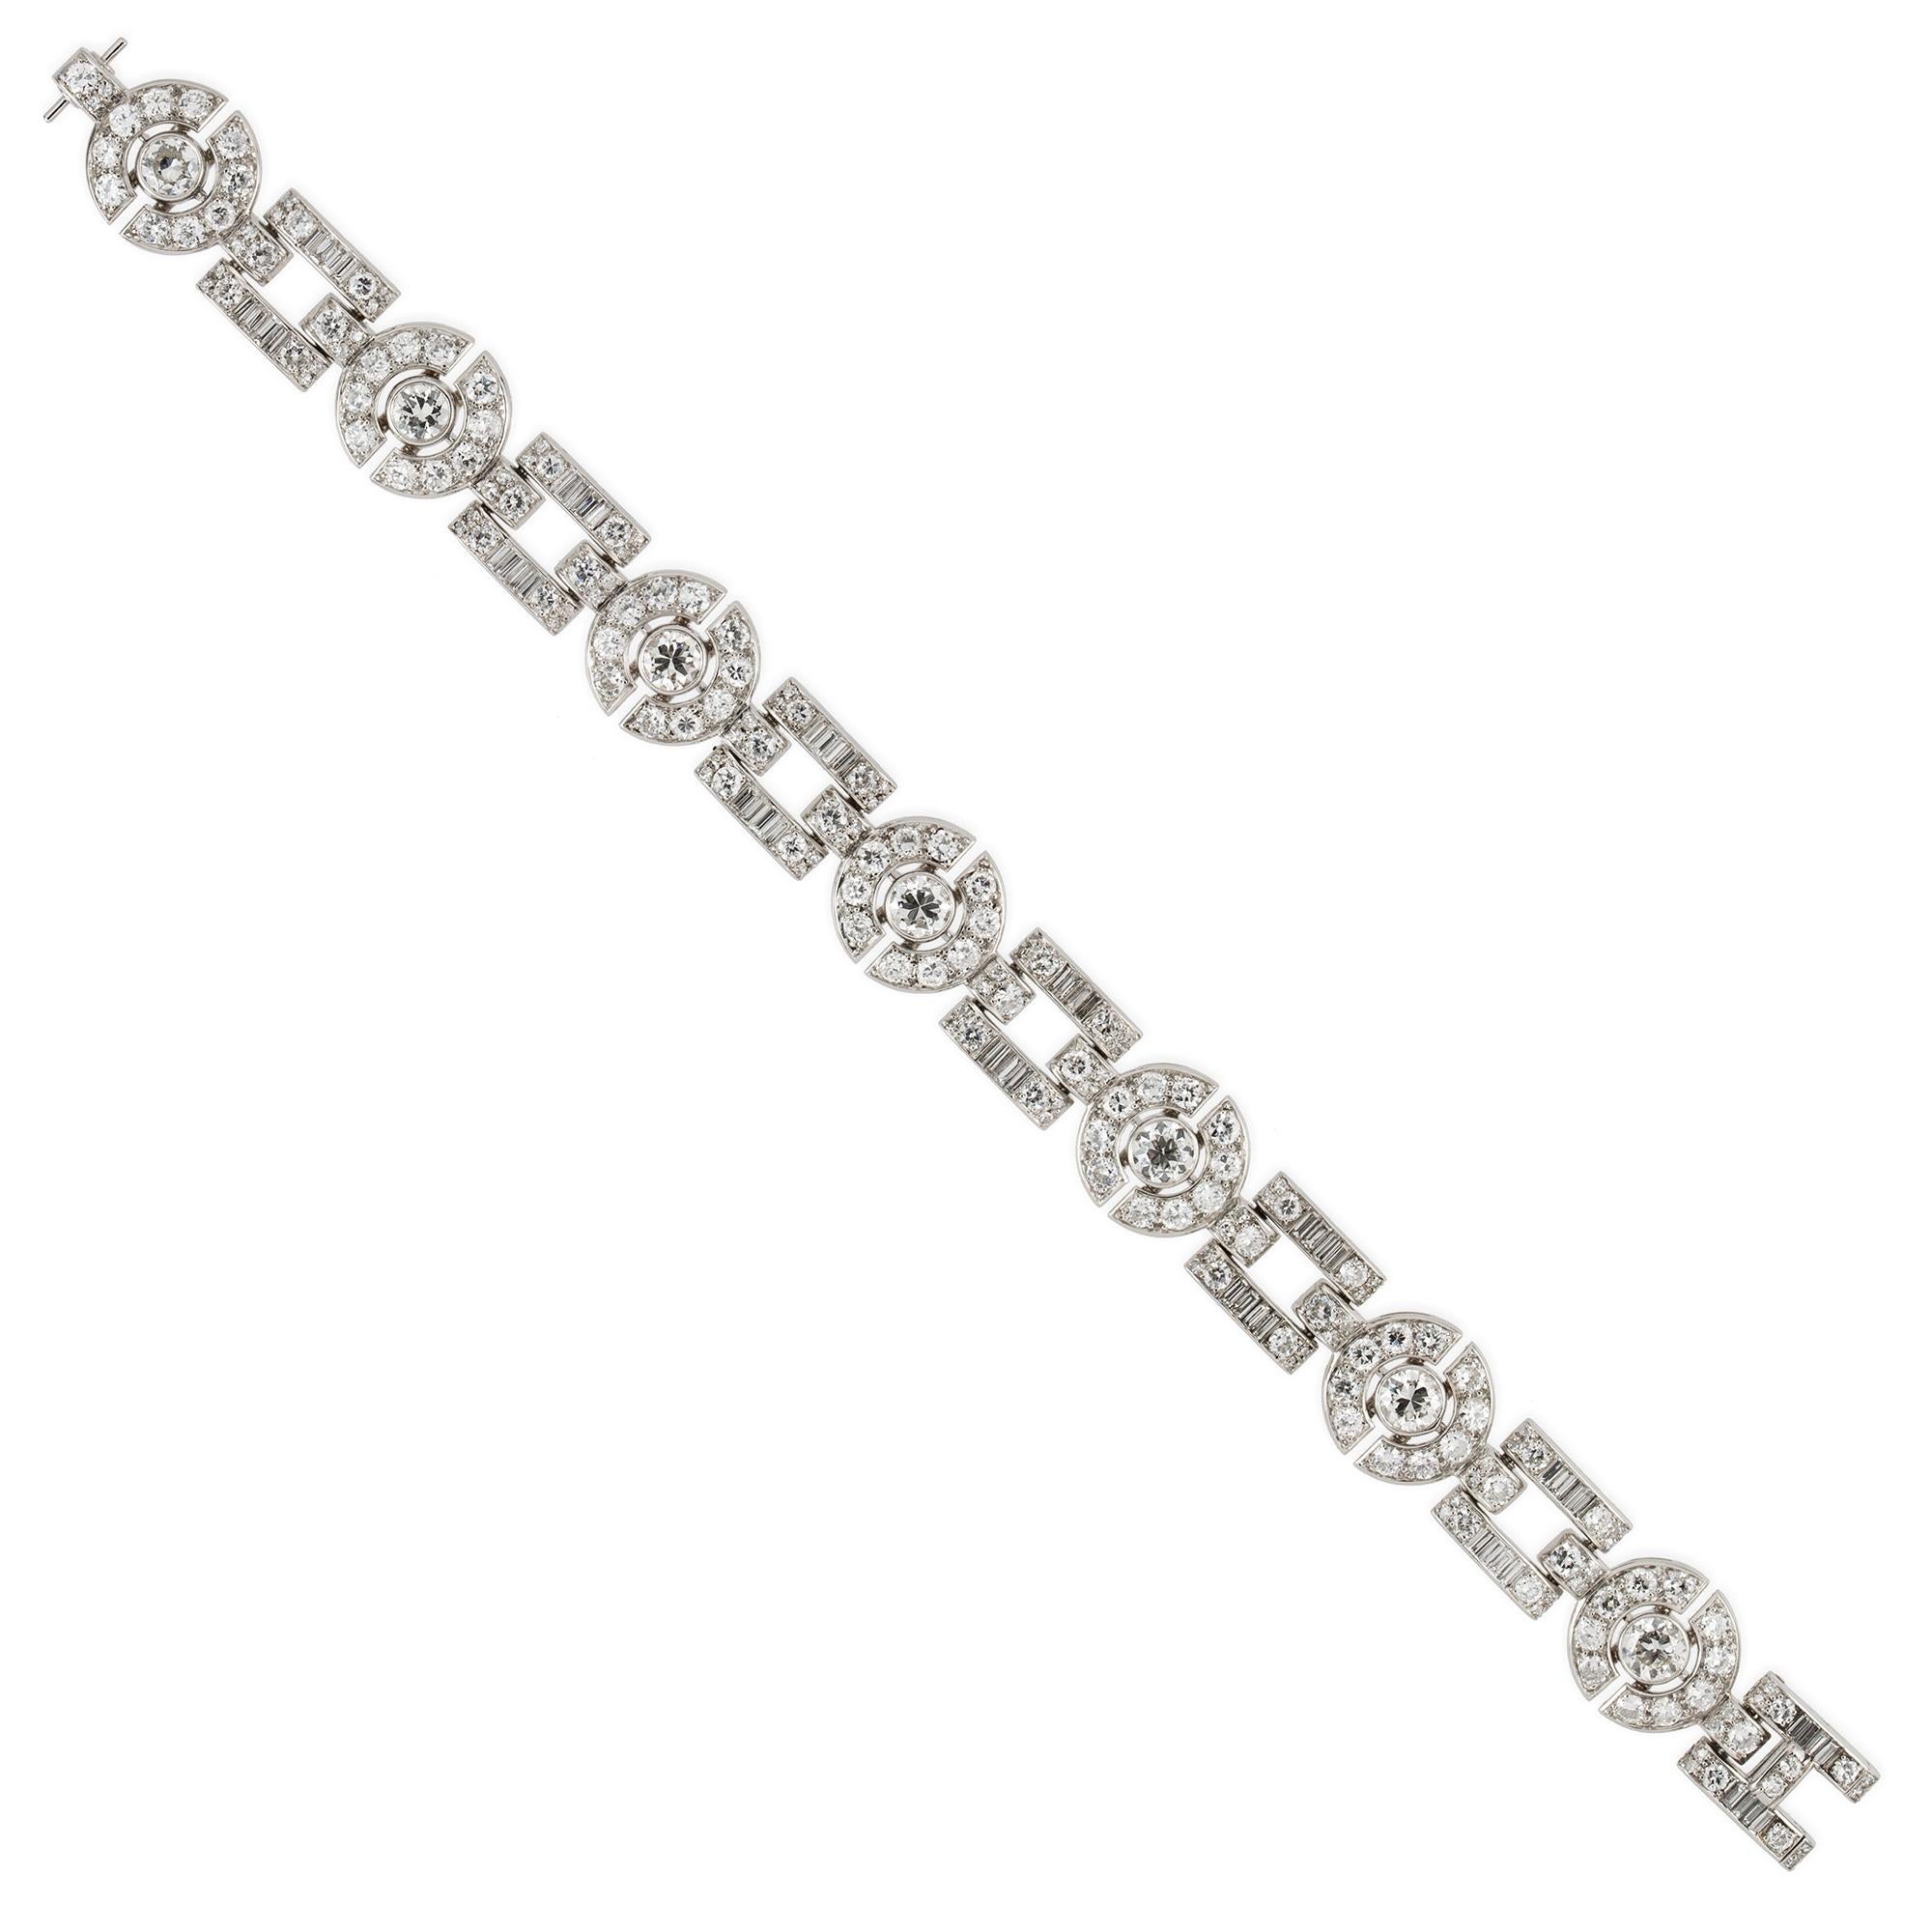 An Art Deco diamond bracelet, consisting of seven old European-cut diamonds, rubover-set within circular-shaped openwork links encrusted with smaller old European and swiss cut diamonds, alternating with square shaped openwork links set with